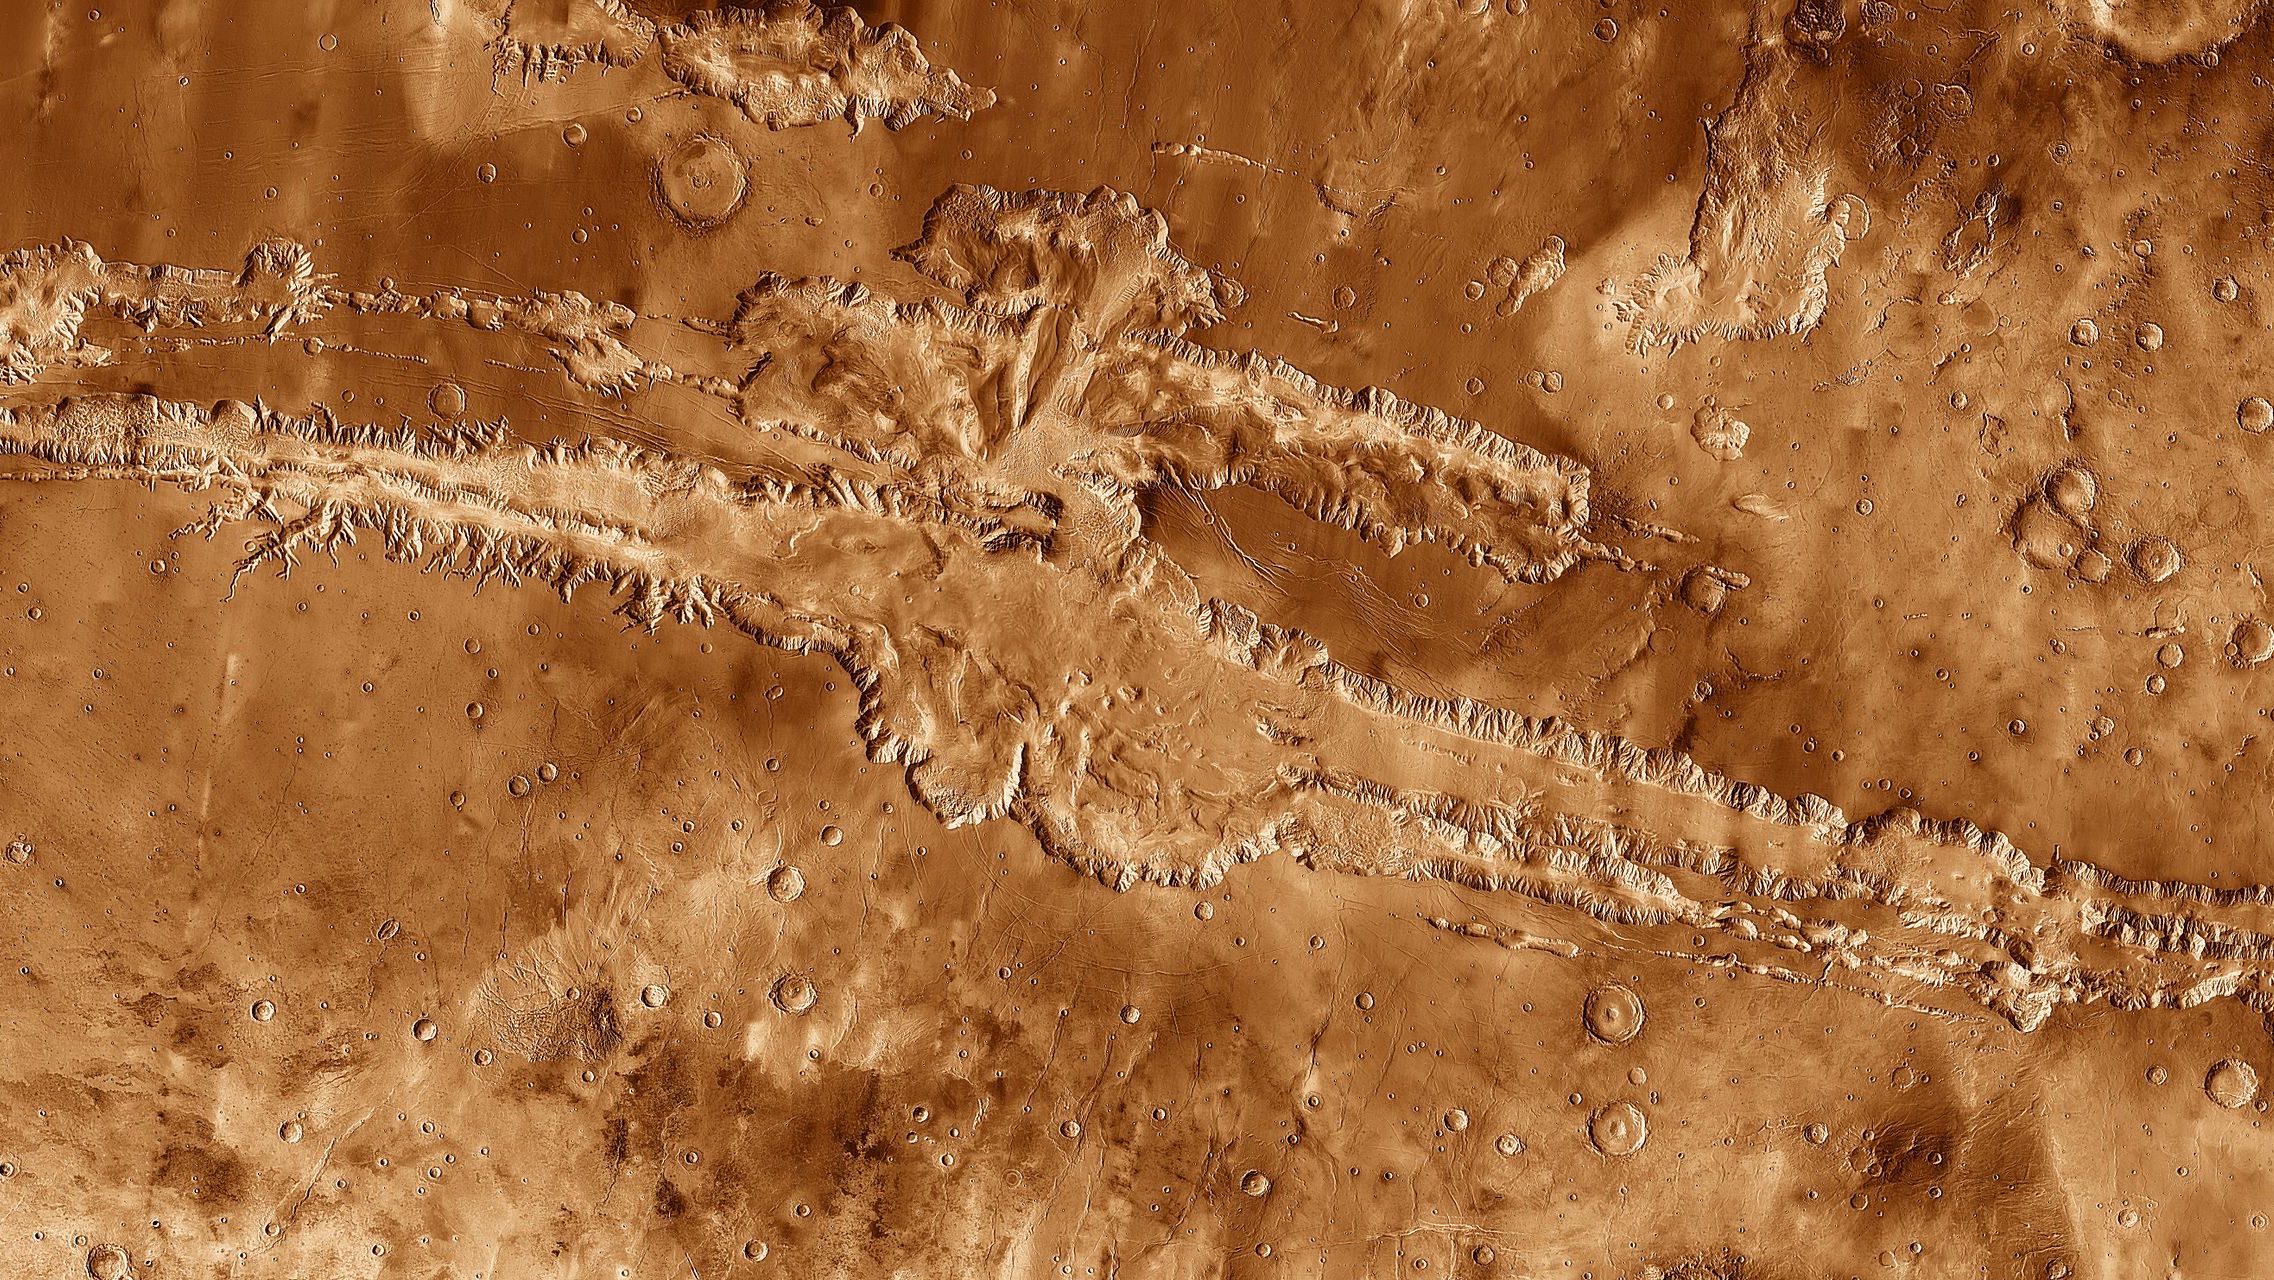 An image of the surface of Mars, showcasing its captivating and unique geological formations resembling a grand canyon.